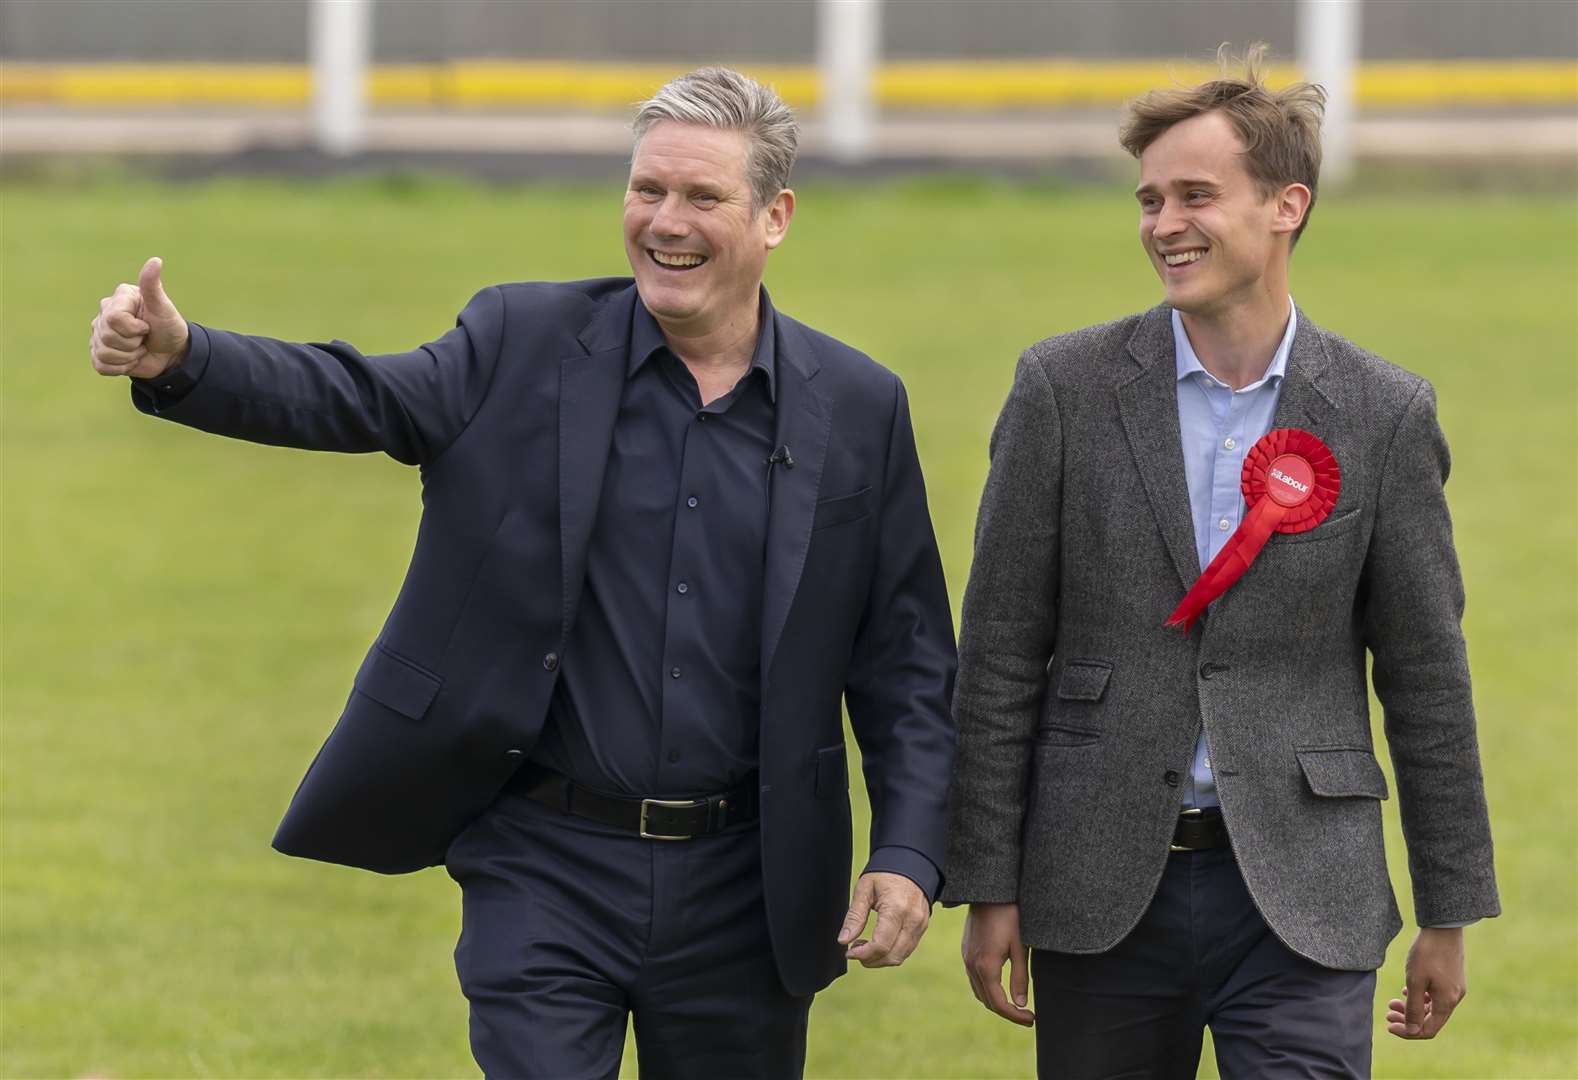 Sir Keir Starmer’s party appears in good financial health despite a continued fall in membership numbers (Danny Lawson/PA)